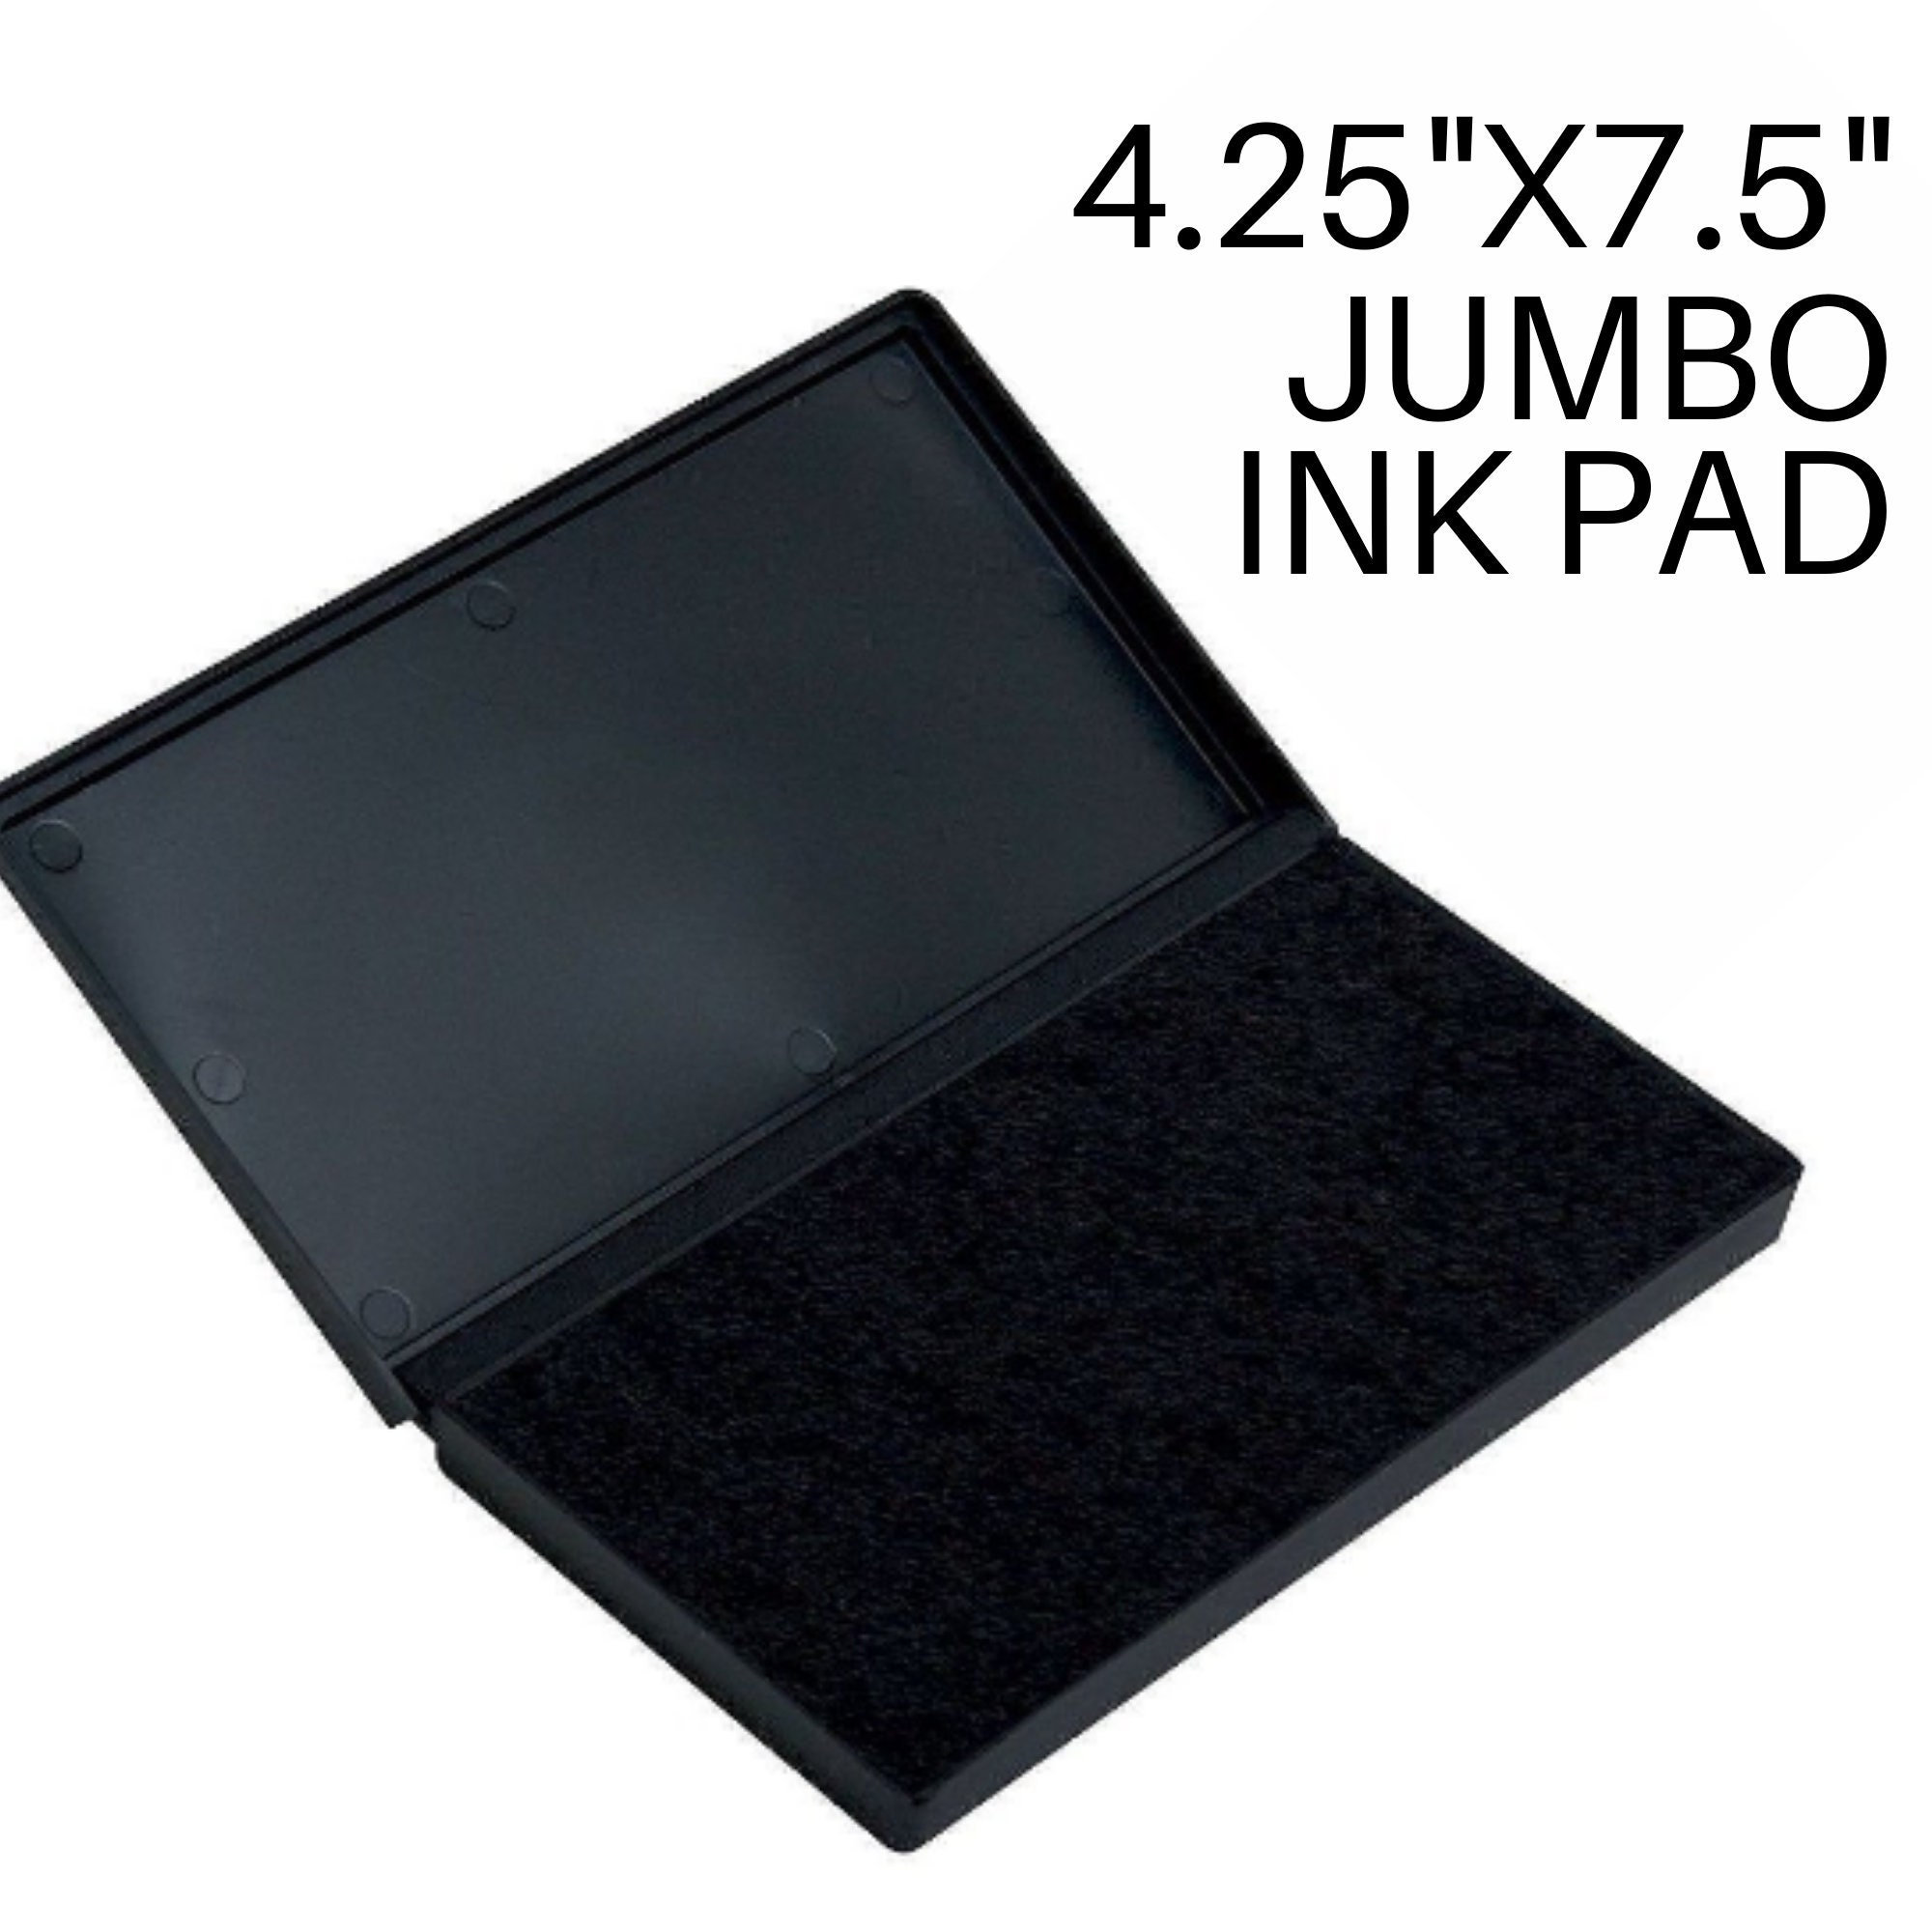 LARGE Ink Pad for stamps up to 4 x 7, Large Black Ink Pad, Blue Red, Large Stamp Pad for Custom Rubber Stamps